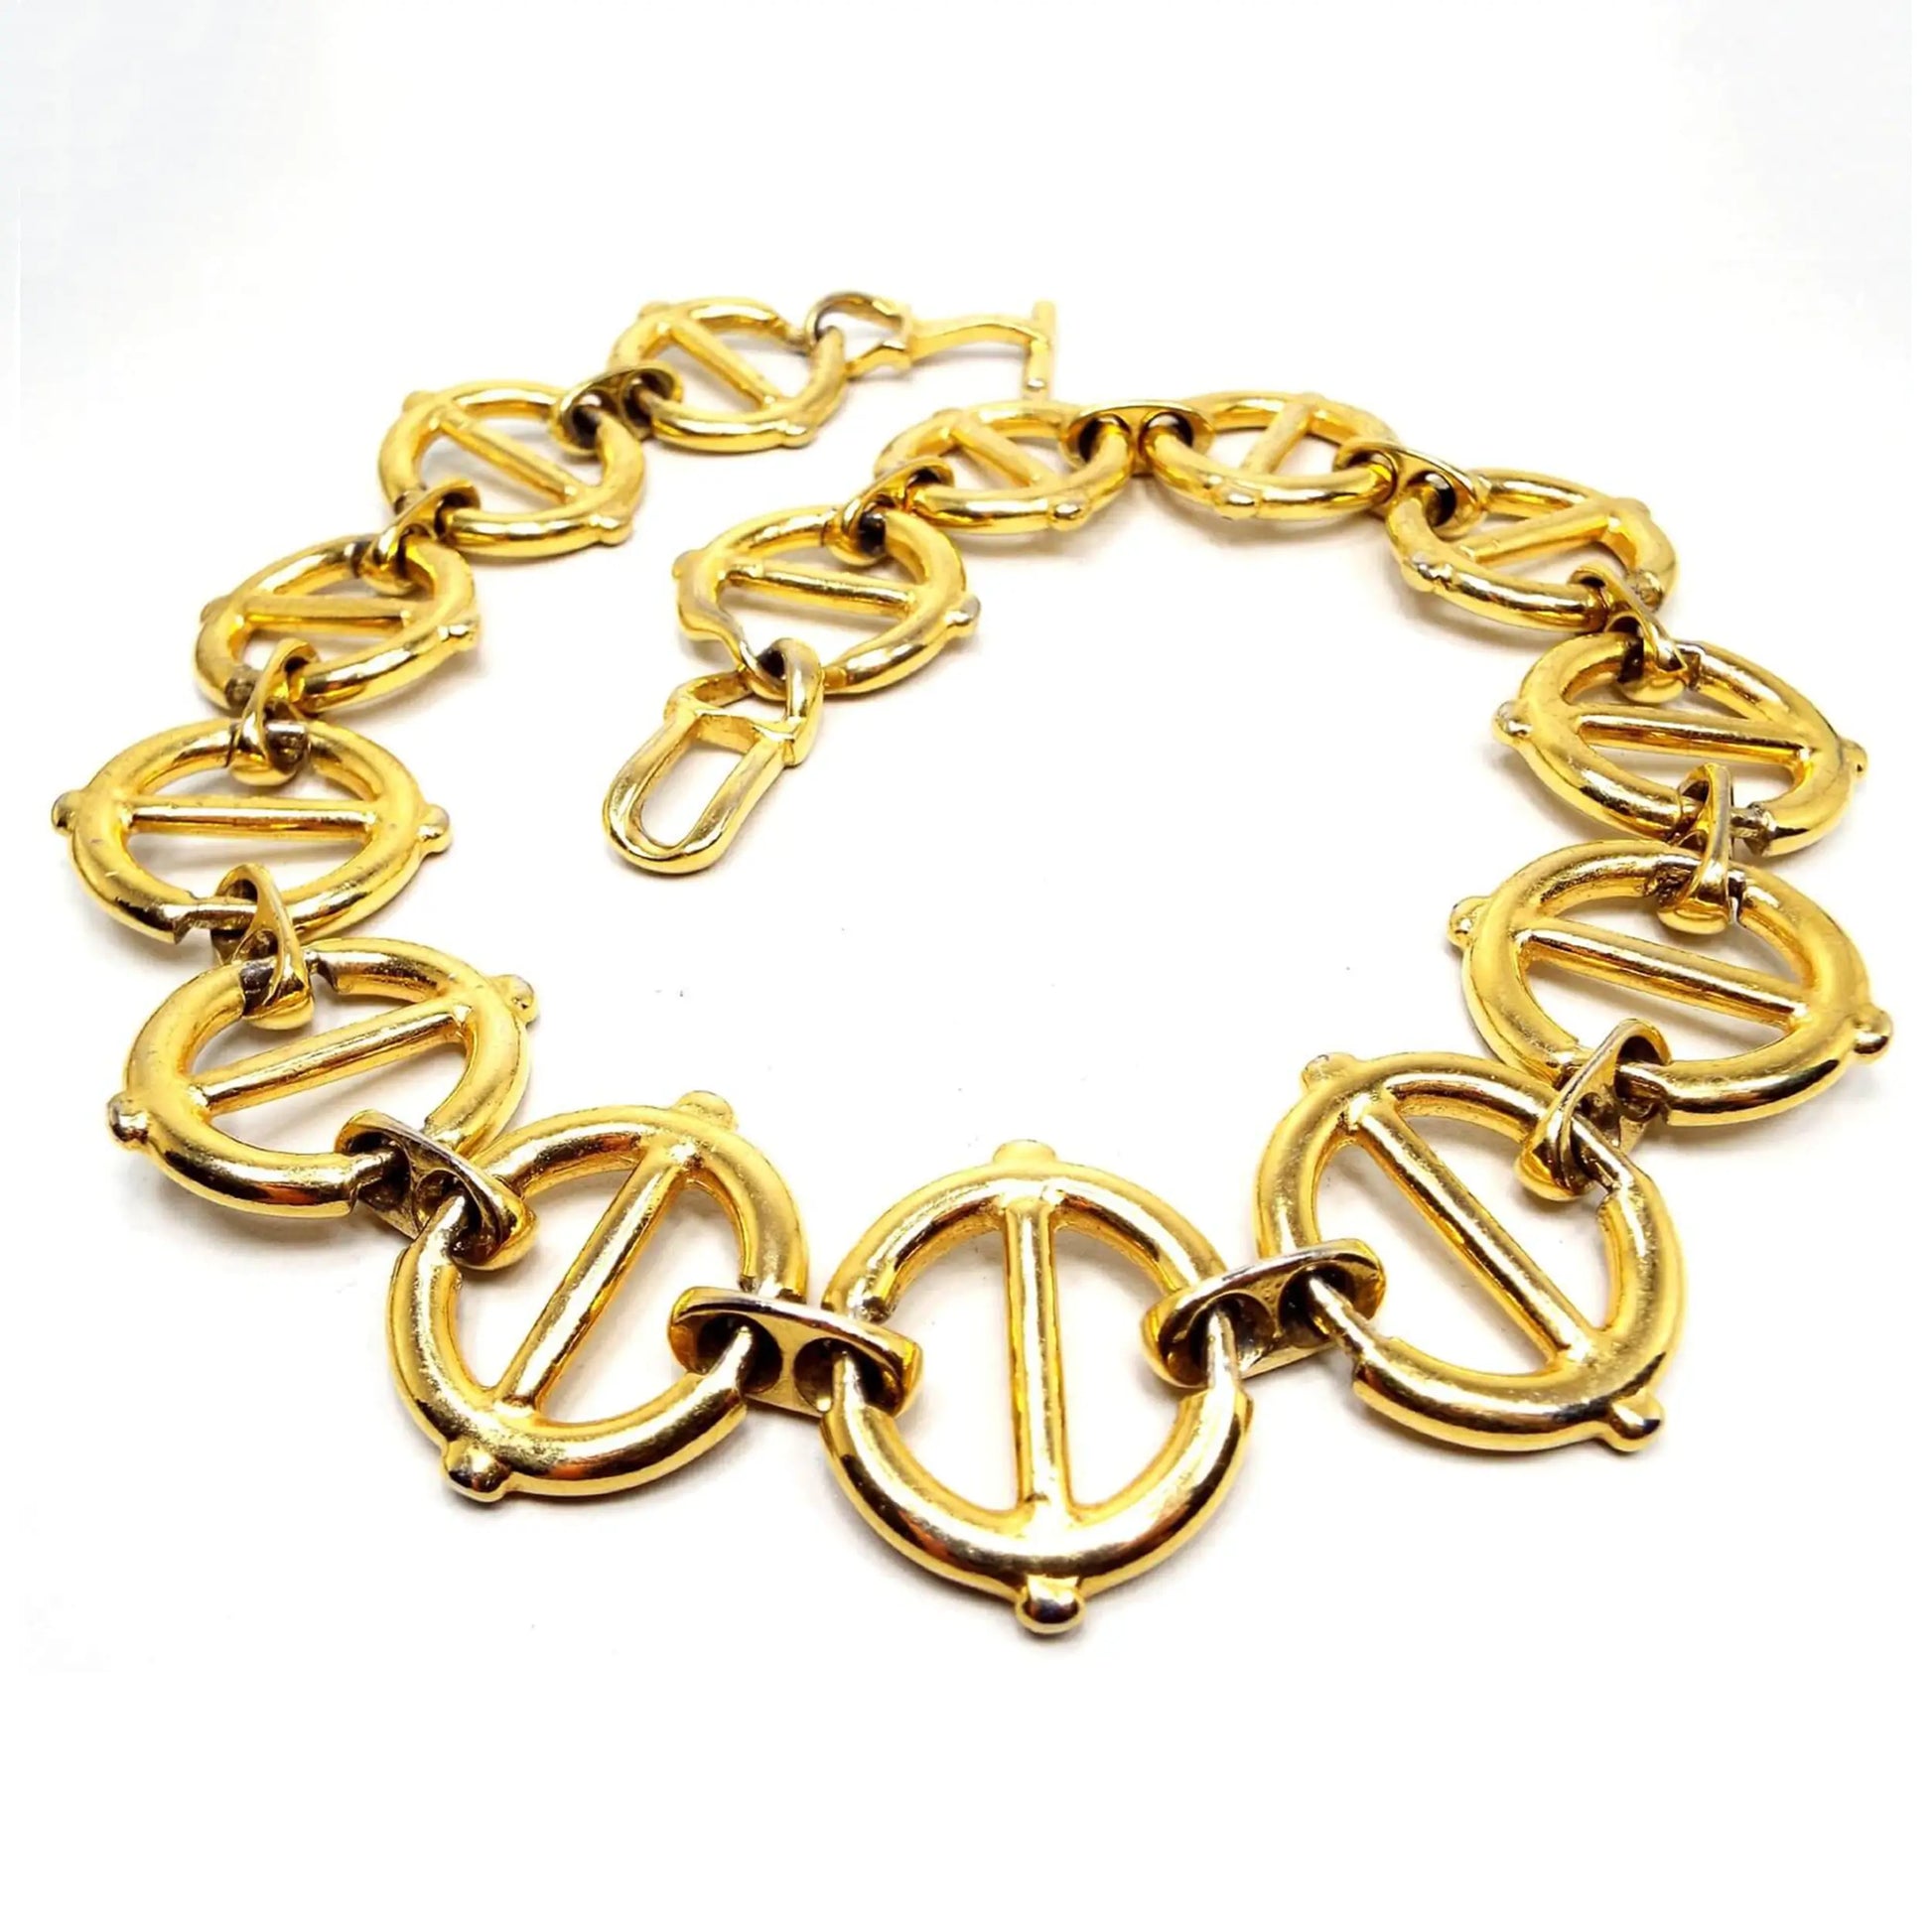 Top view of the retro vintage large wide link necklace. The metal is gold tone in color. The links are large and round with a bar through the middle and they are held together by smaller sized oval links with holes. There is a large toggle clasp at the end.